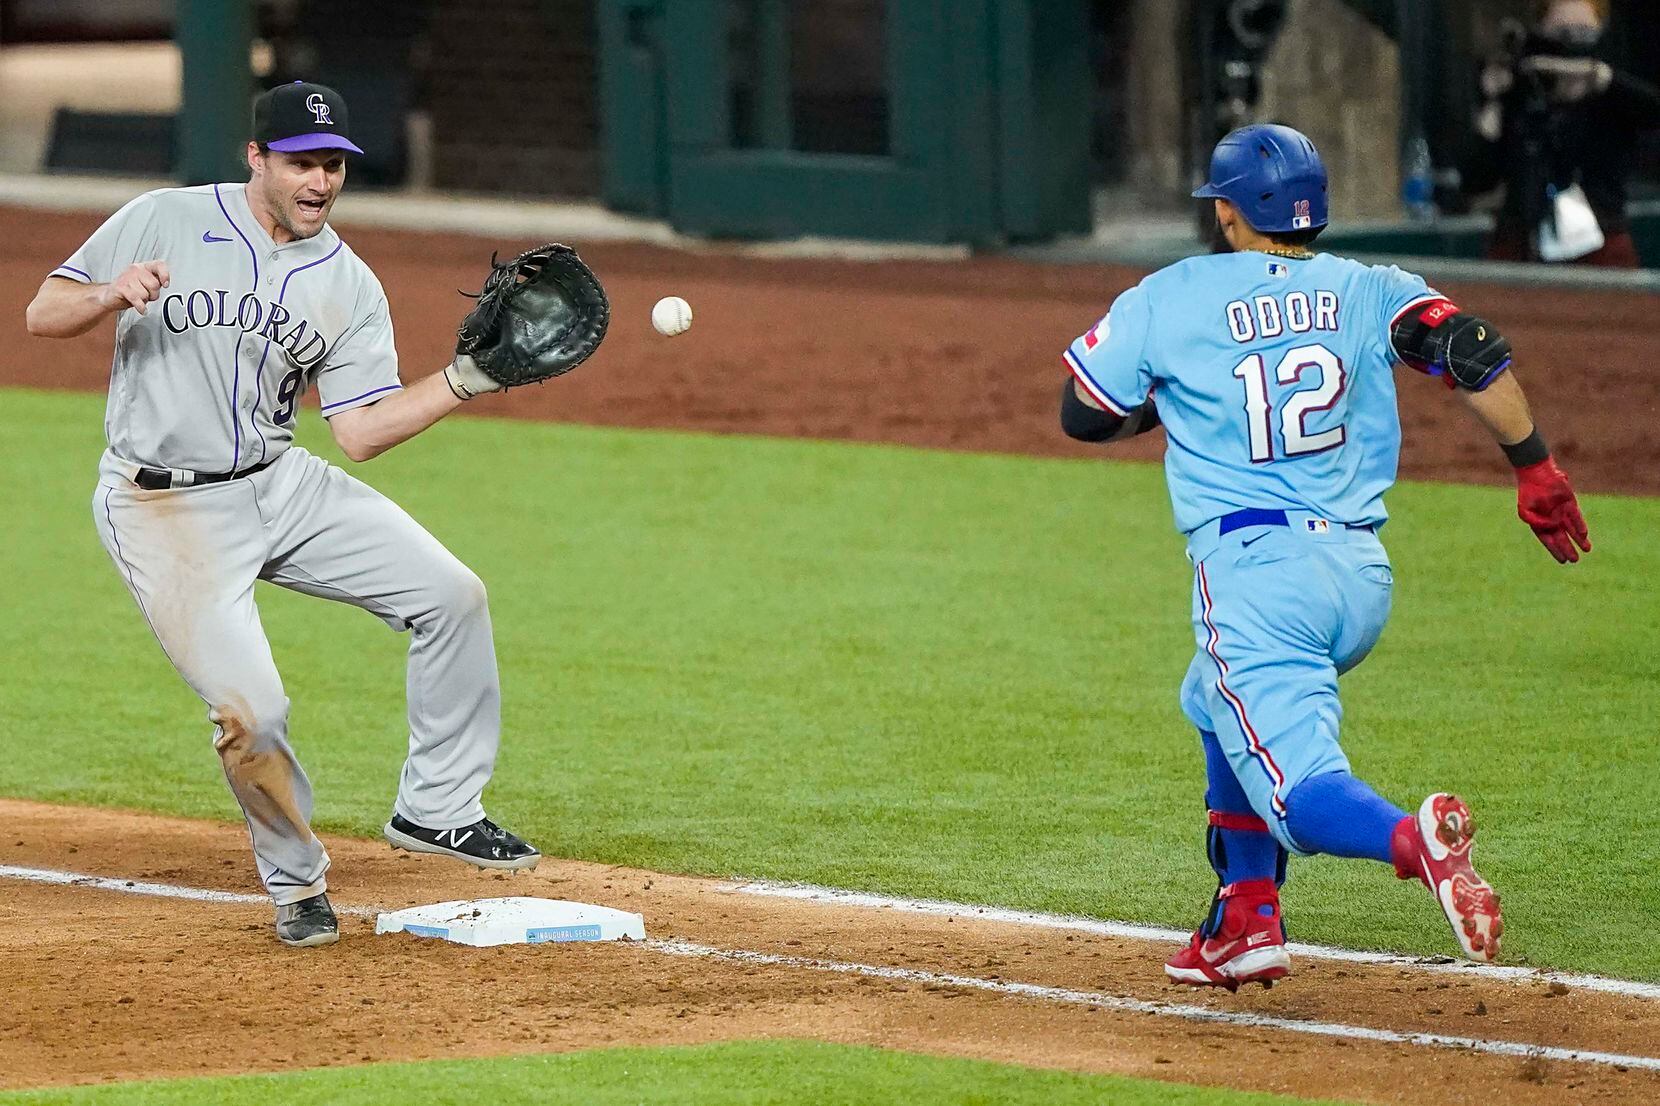 Texas Rangers second baseman Rougned Odor is out at first as Colorado Rockies first baseman...